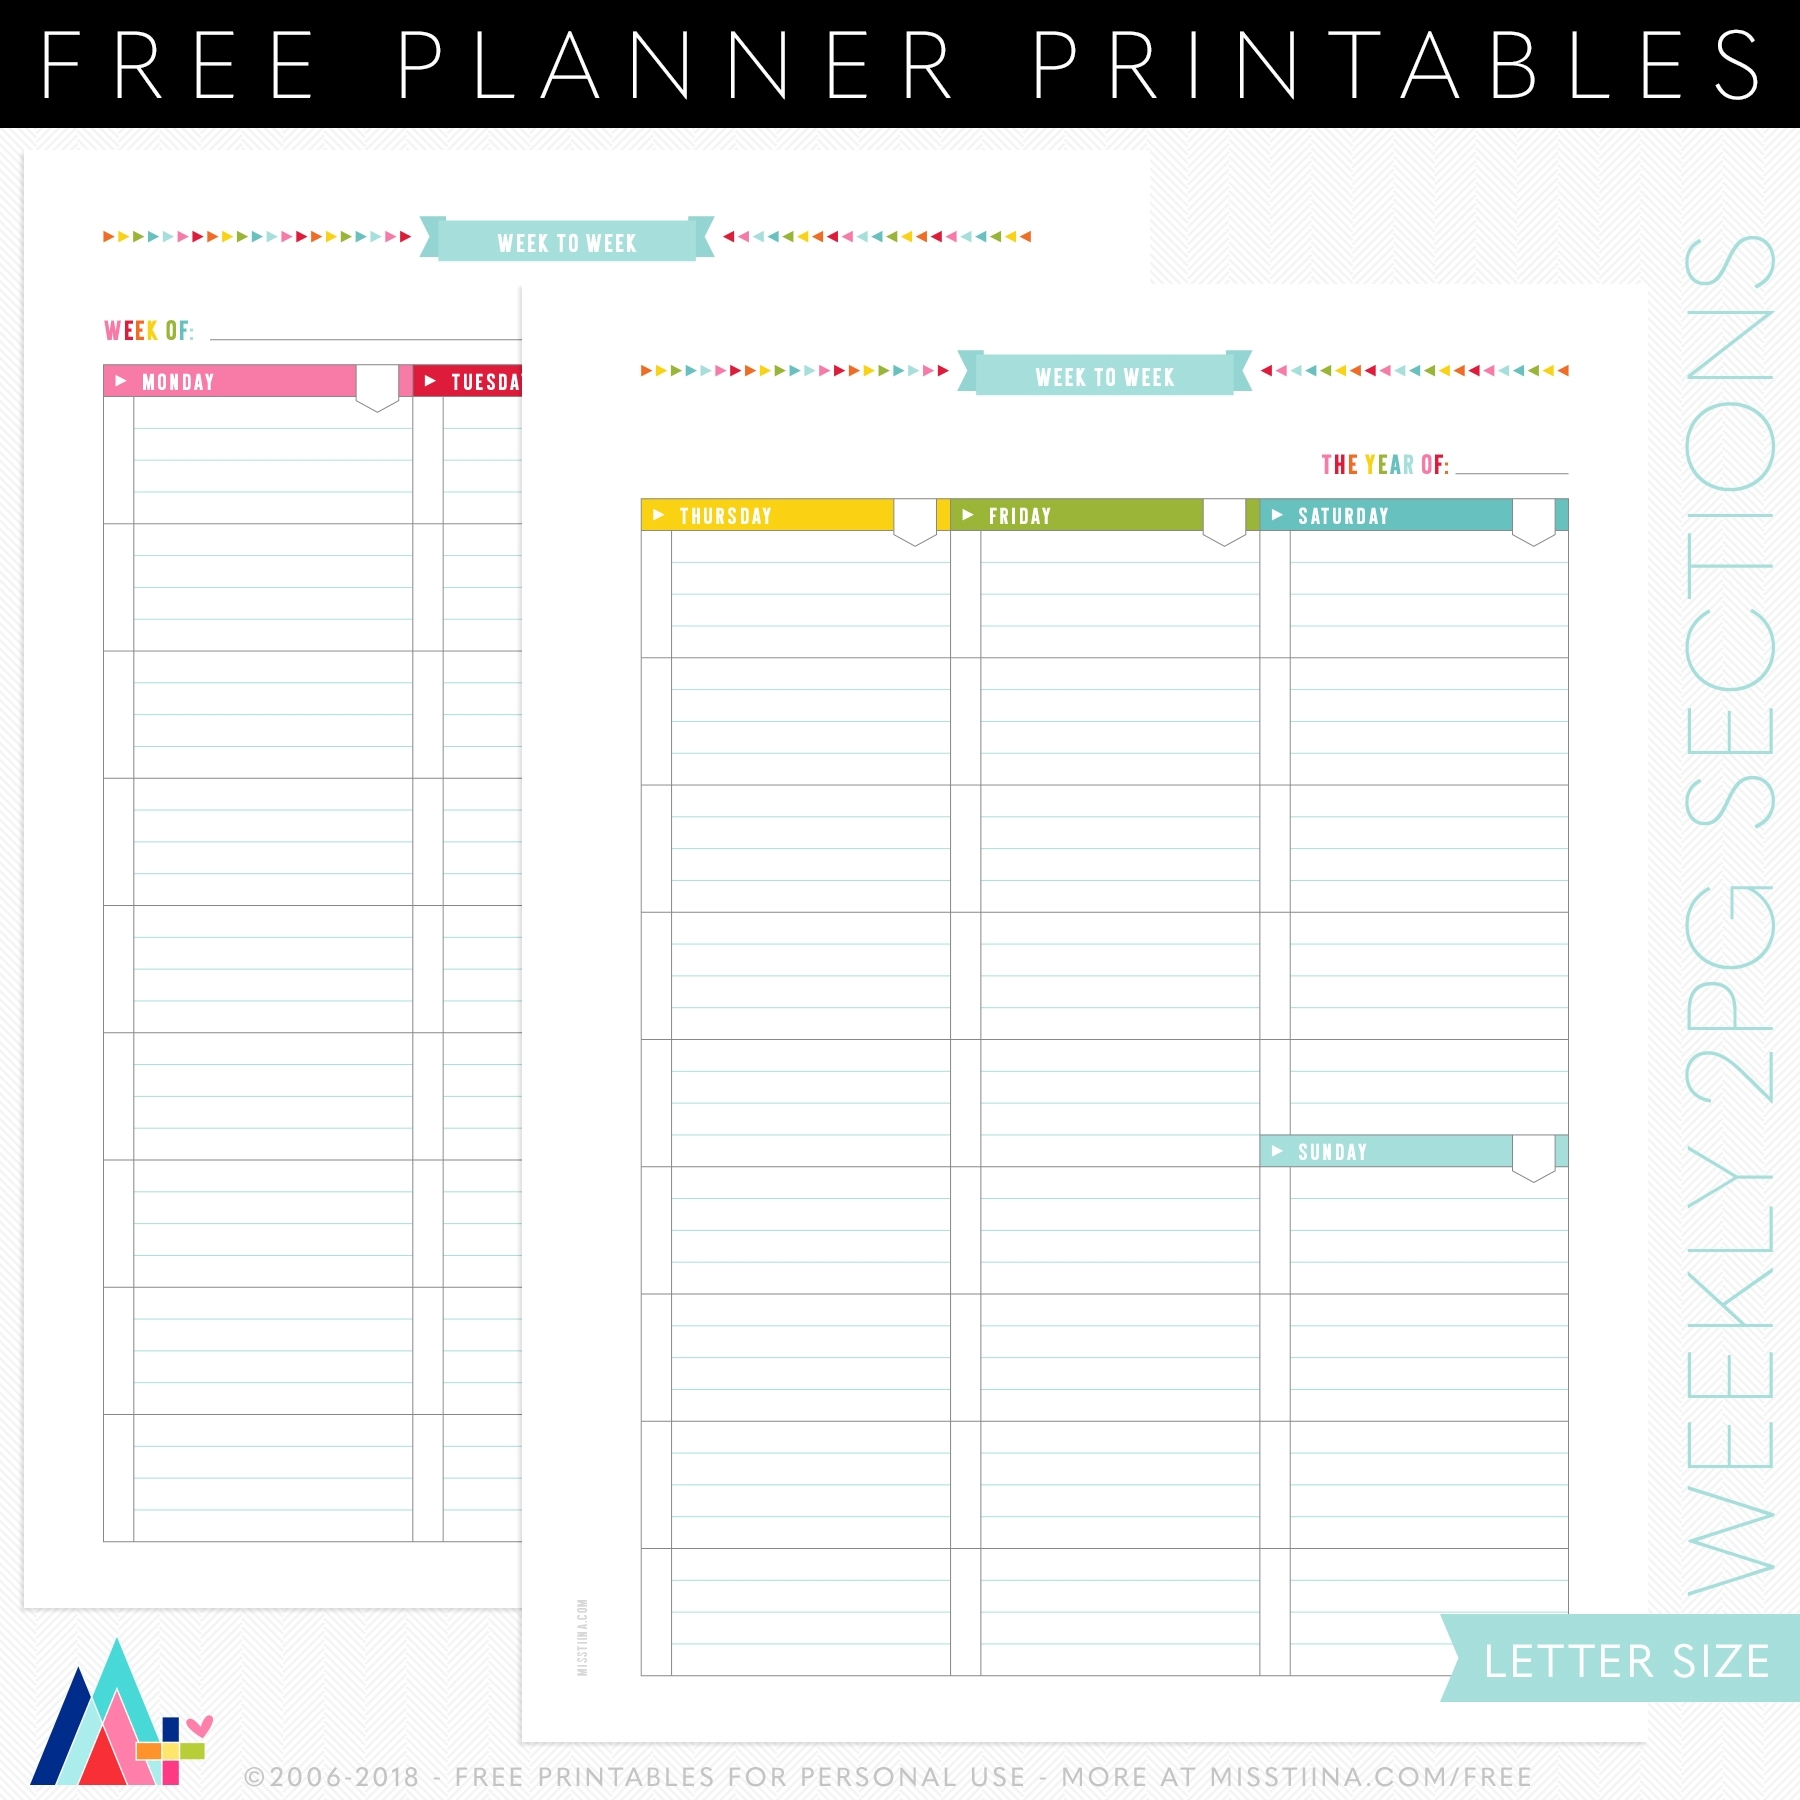 Planner Printables | Misstiina regarding Free Printable Weekly Calendar Page With Notes Sections